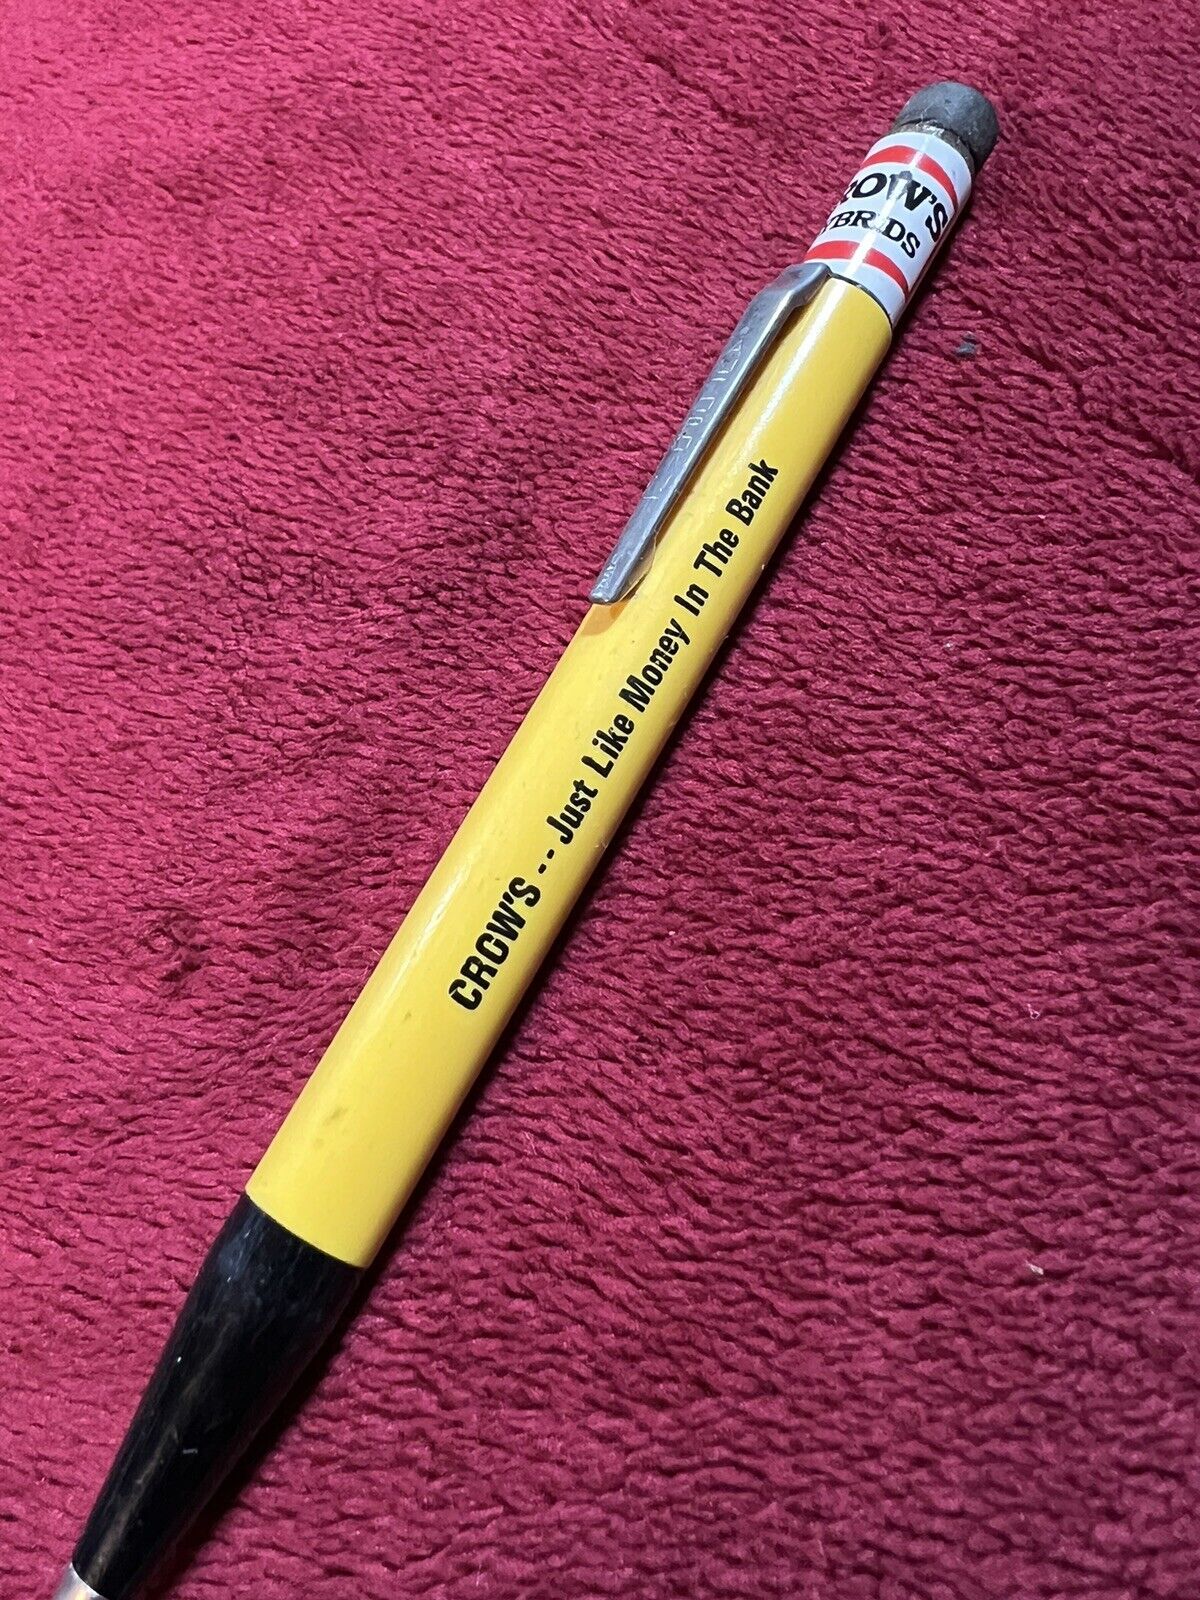 Vintage Crow's Hybrid Seed Corn Mechanical Pencil, “Just Like Money In The Bank”